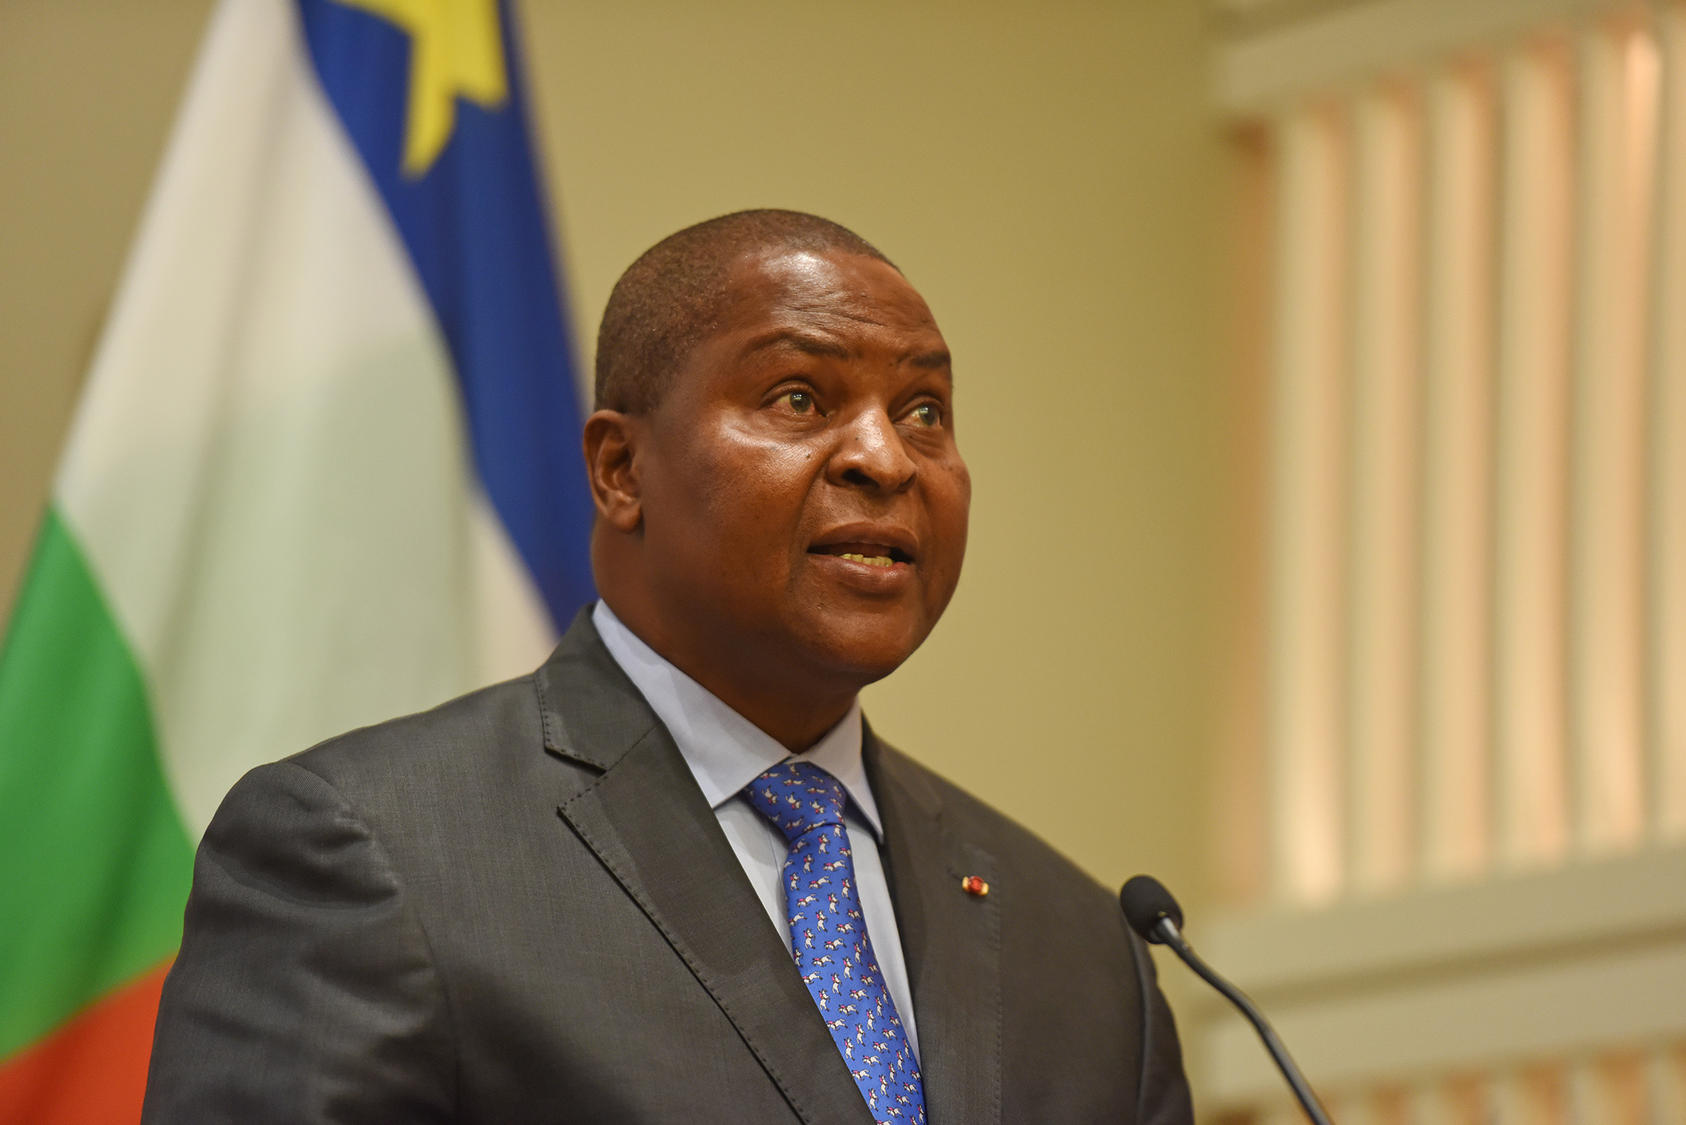 Central African Republic President Faustin-Archange Touadéra at the U.S. Institute of Peace, April 9, 2019. 